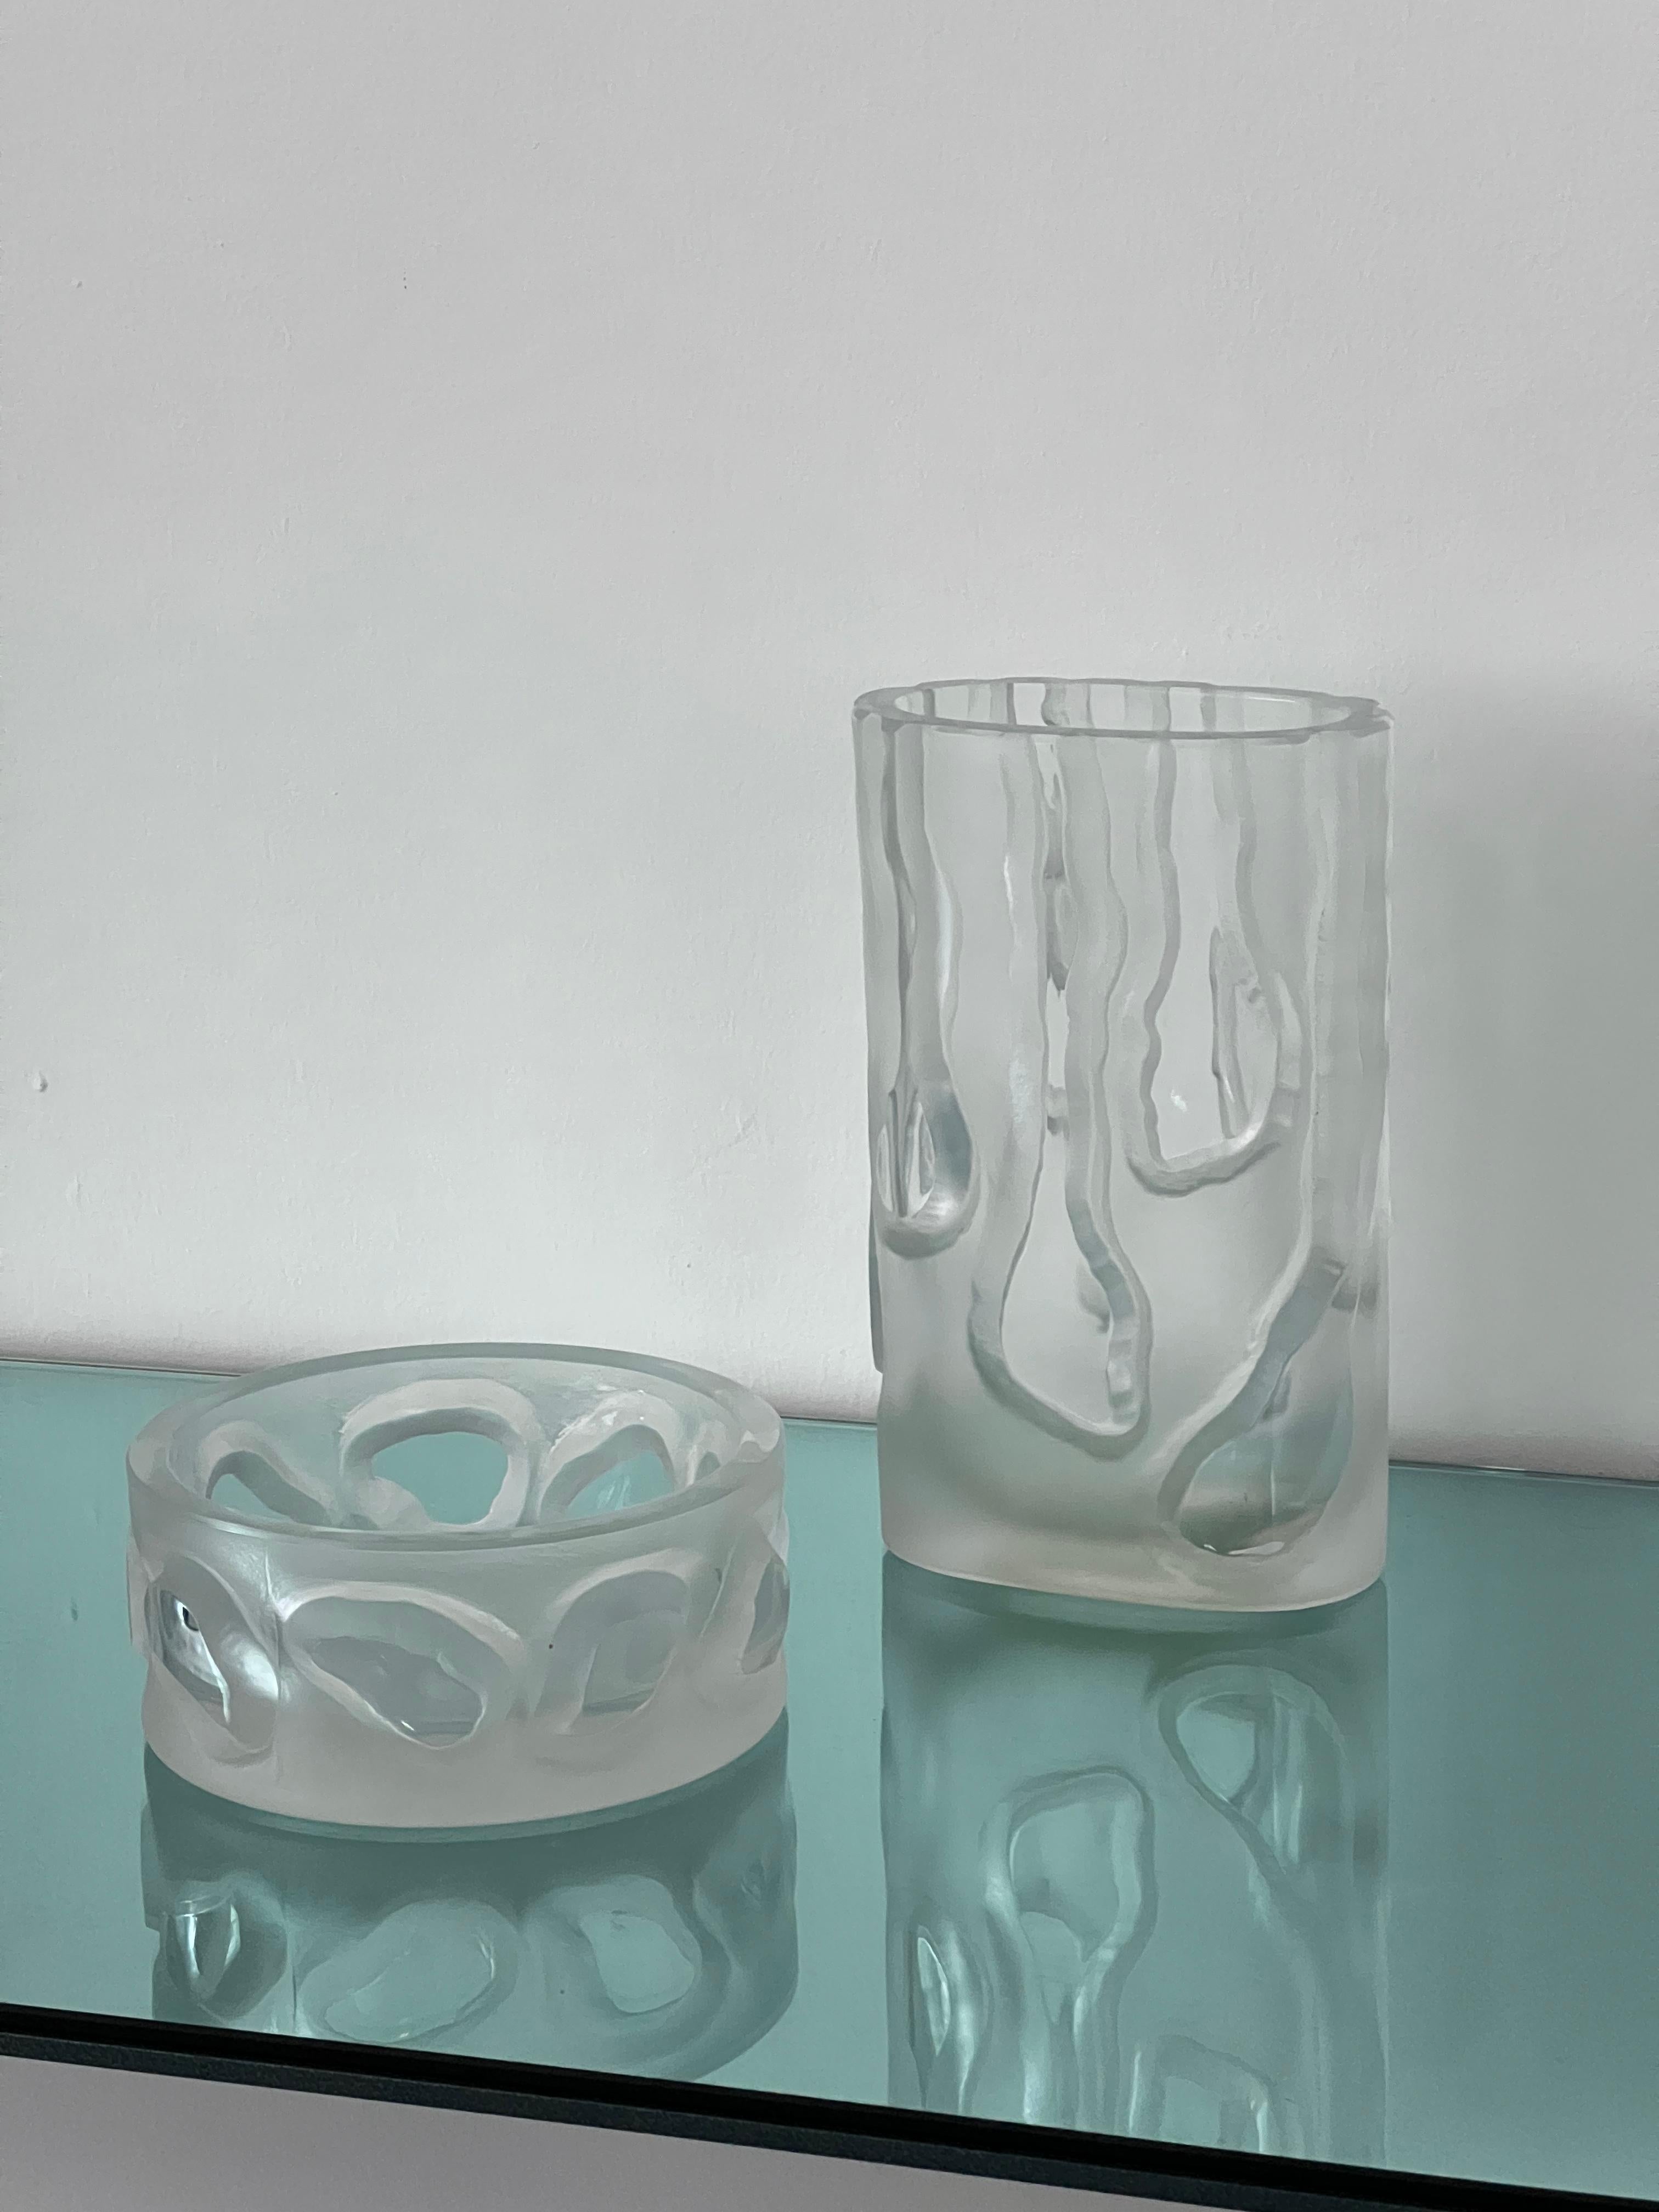 Vintage set of two matching glass pieces, a tall vase and a low bowl, both made in the same shade of clear glass and both with a frosted/sandblasted surface and egraved decorations that bring out the smooth surface of the glass. They are designed in